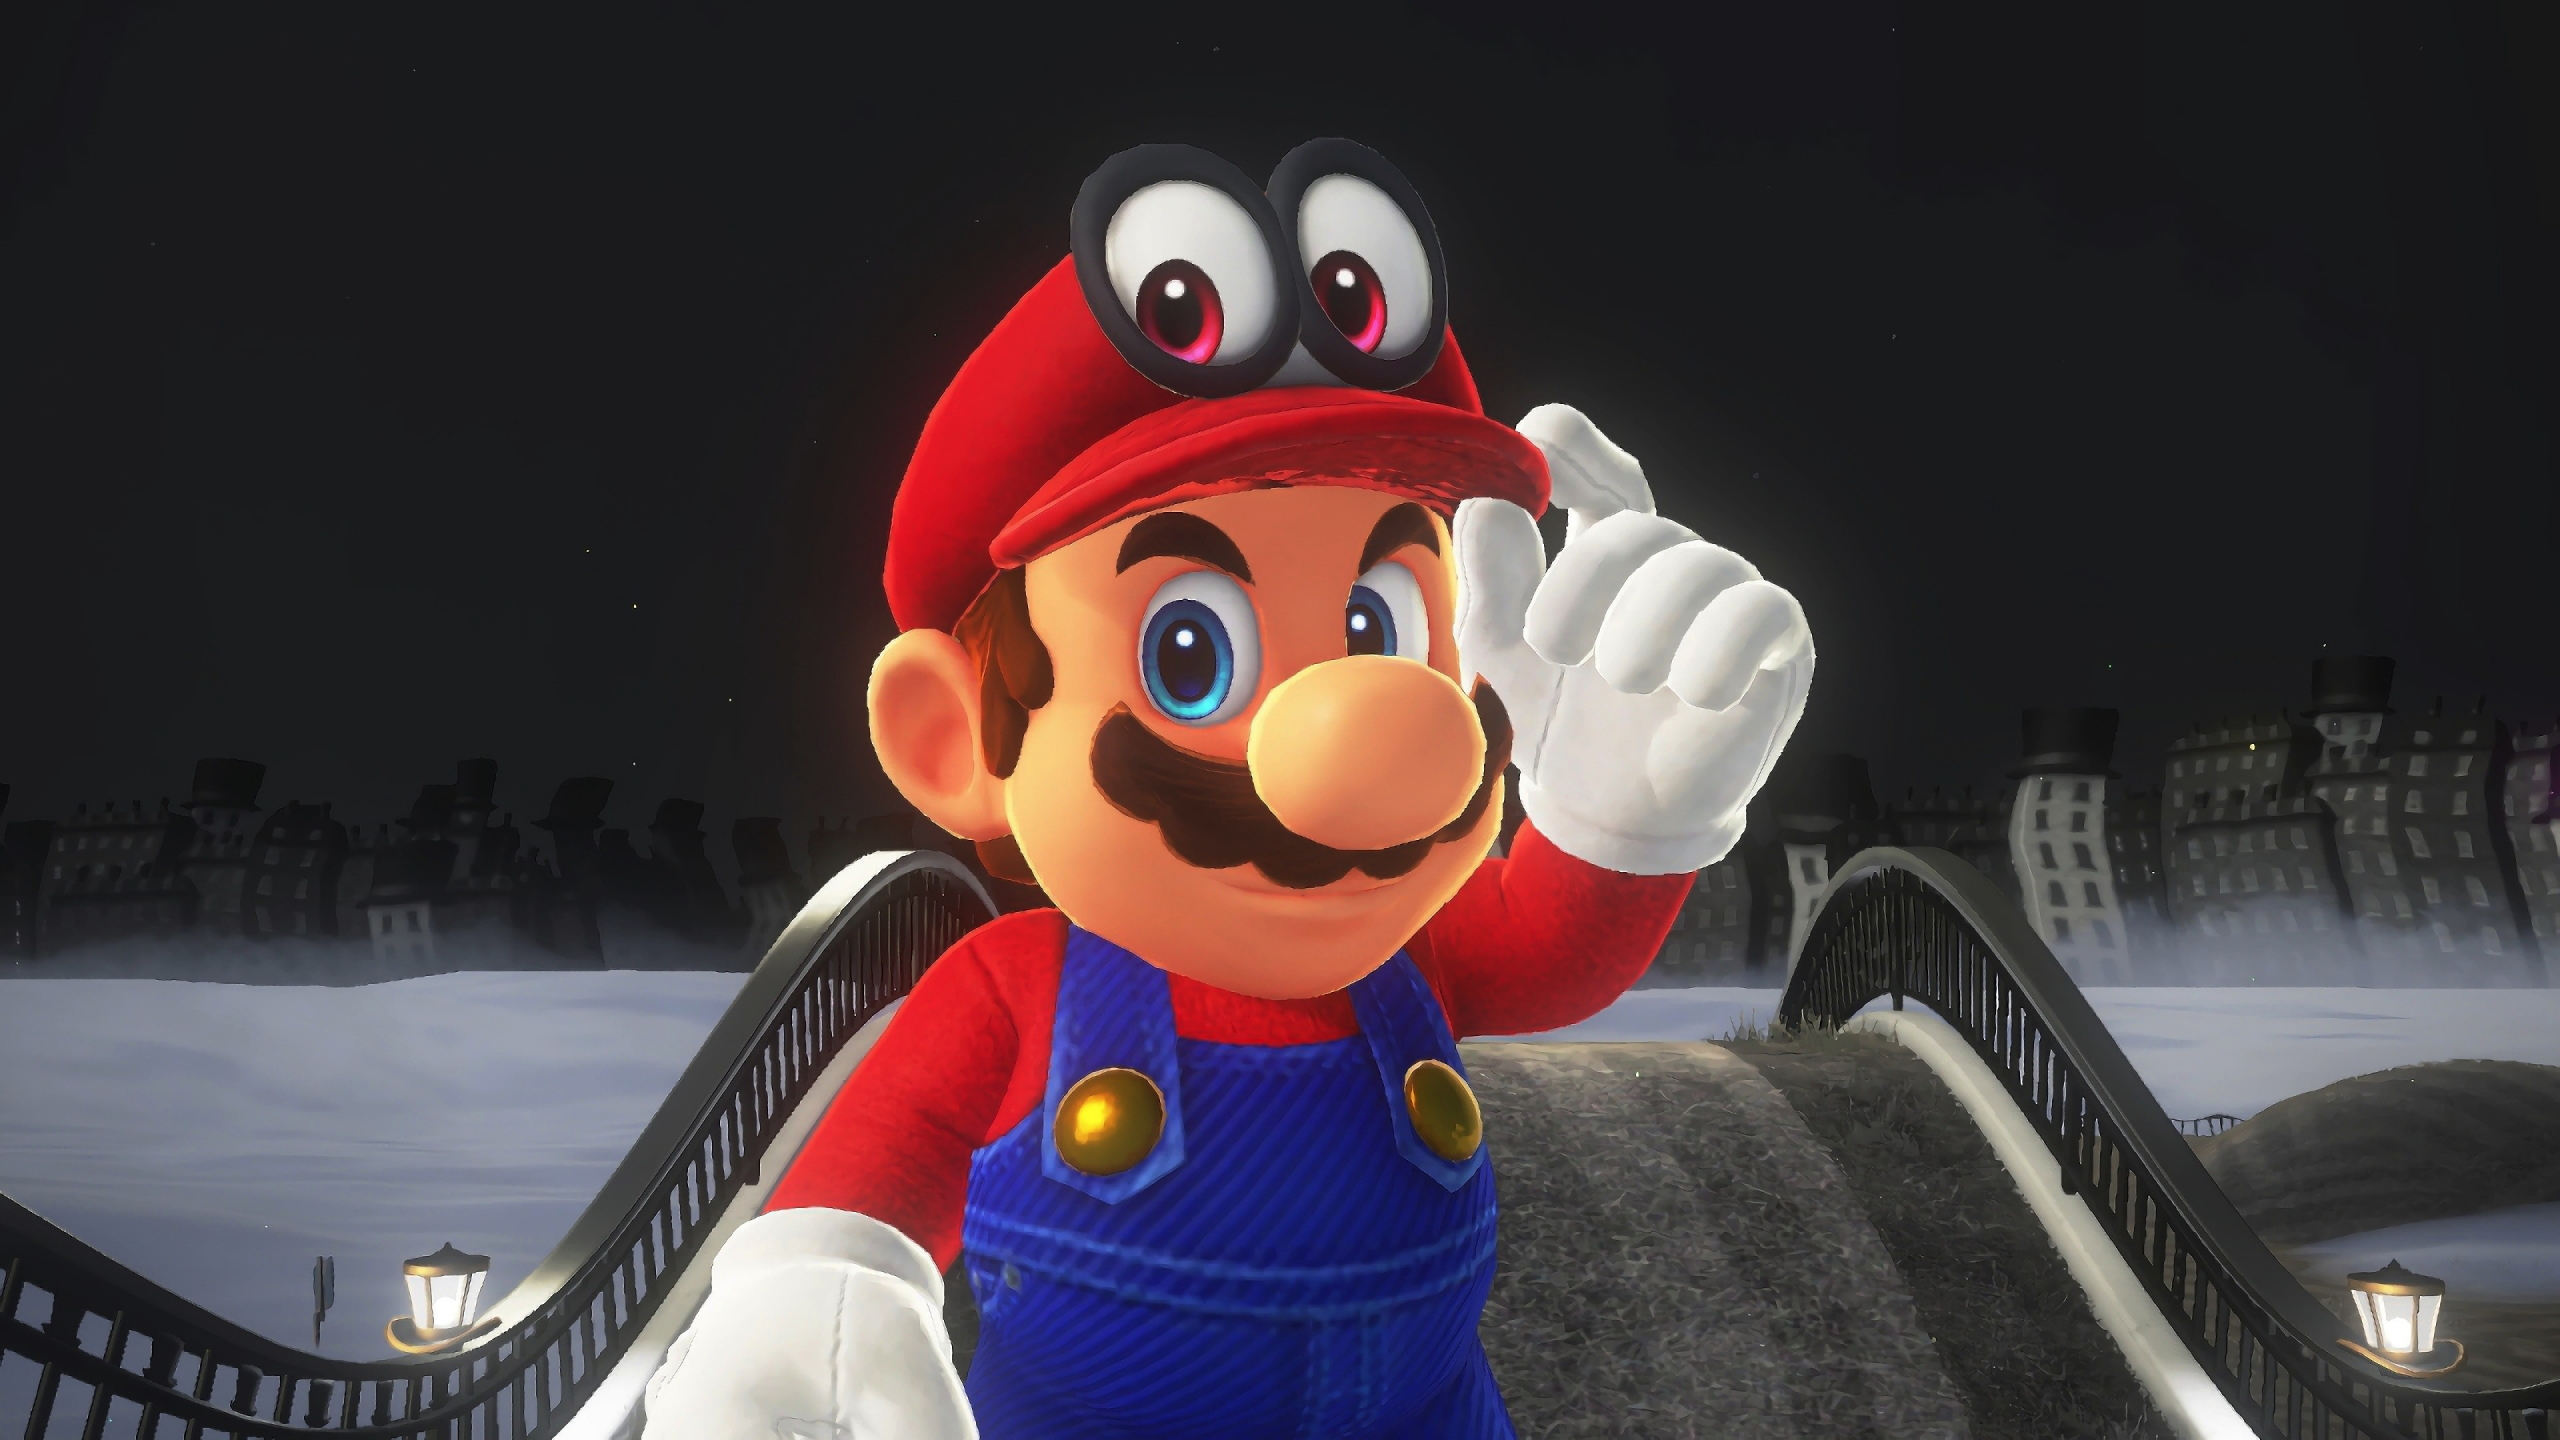 super mario odyssey download pc game full free